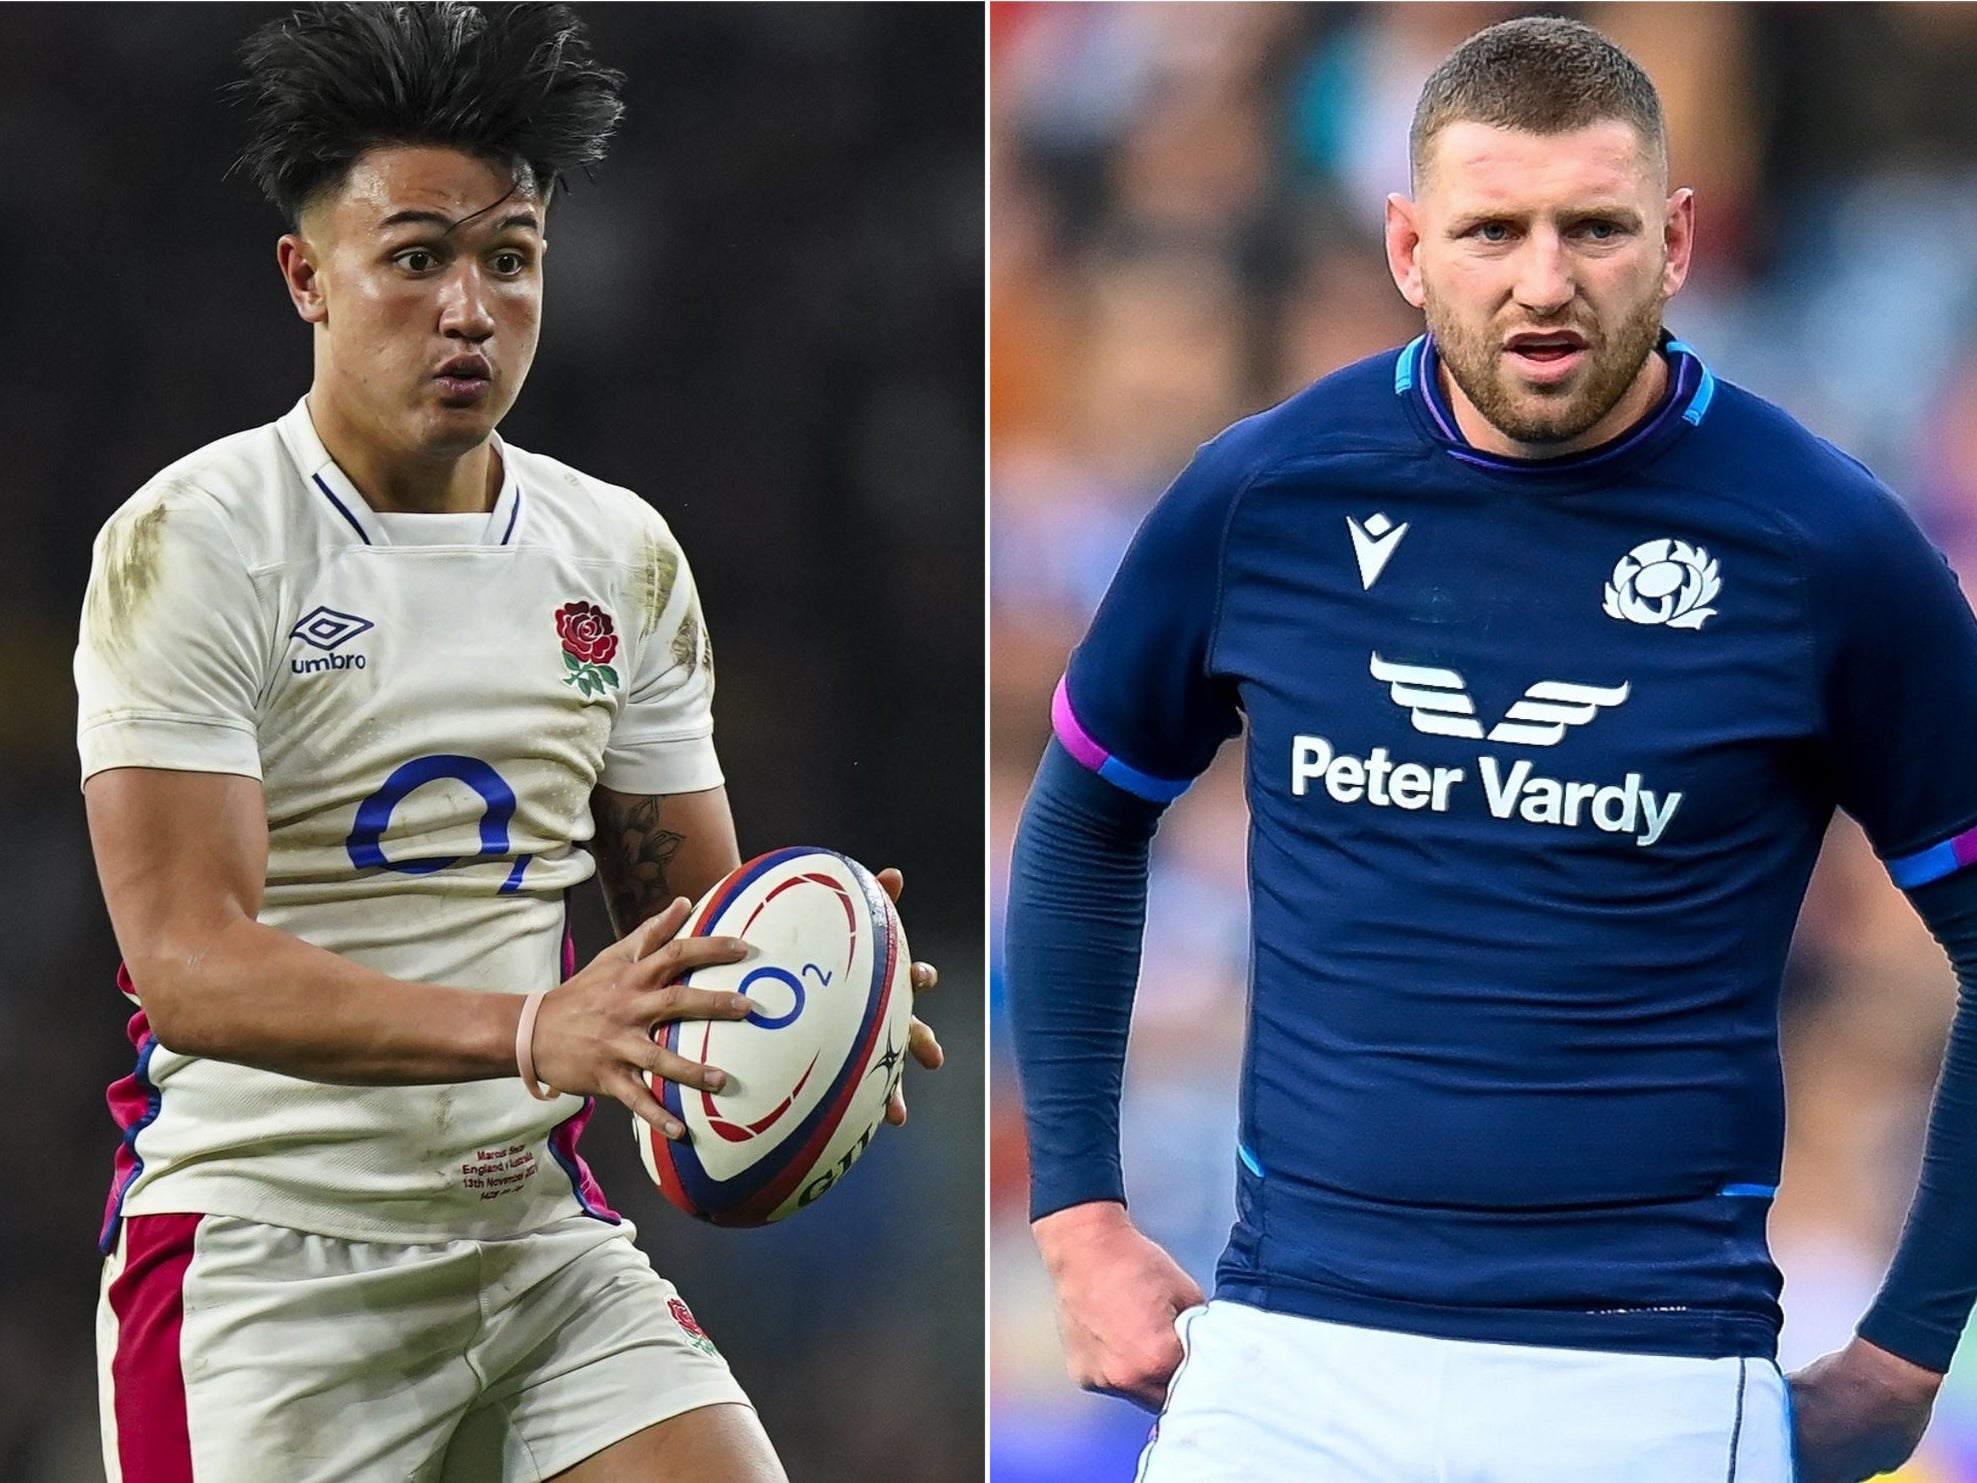 Fly-halves Marcus Smith and Finn Russell go head to head in Scotland’s Six Nations opener against England at Murrayfield